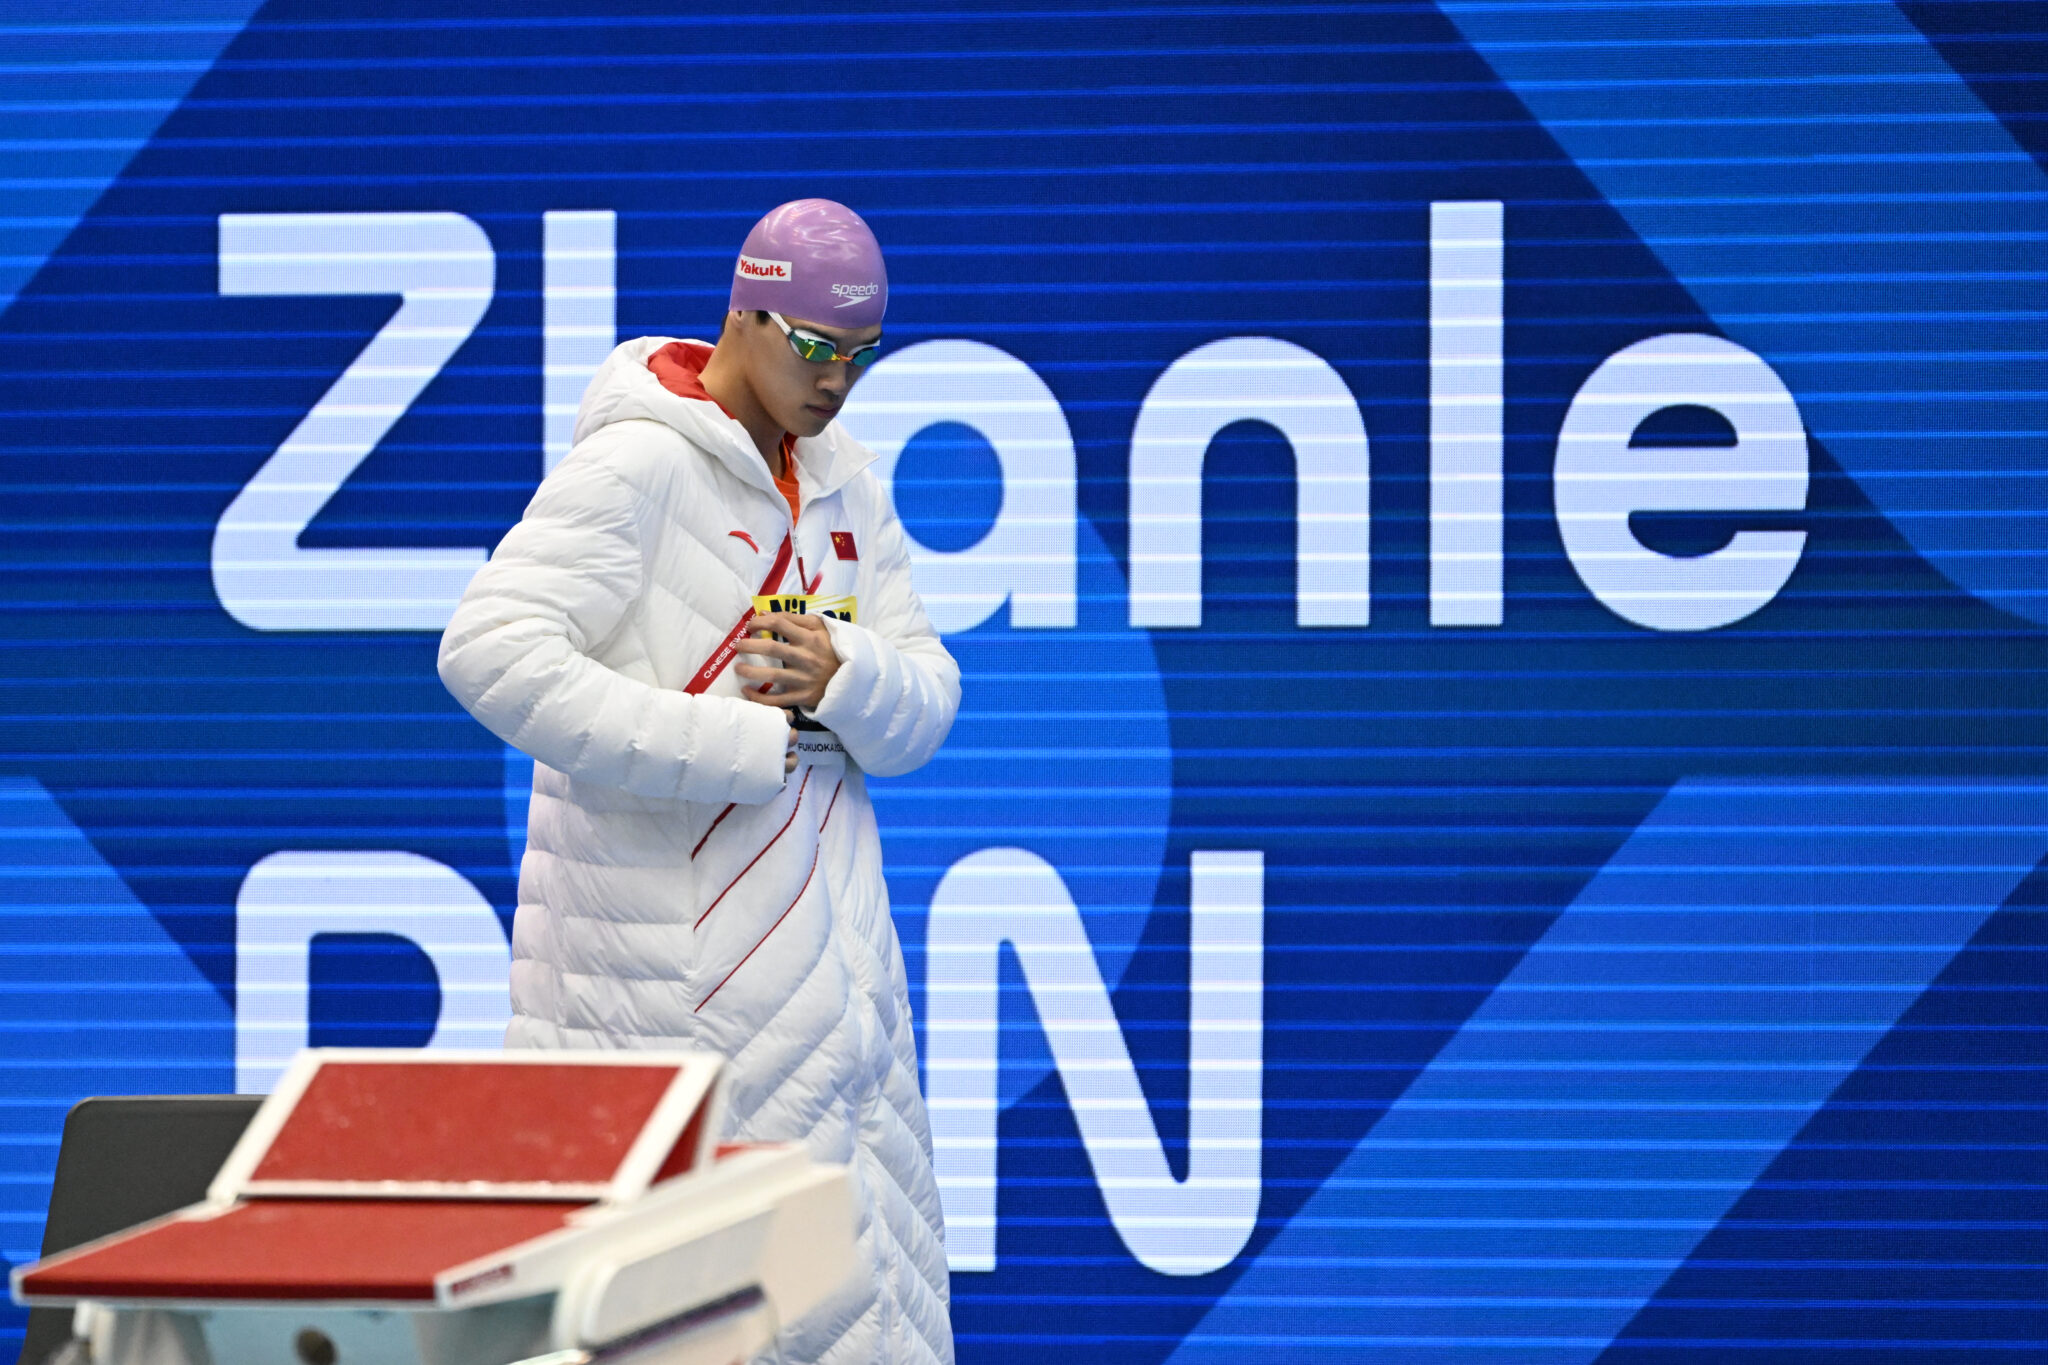 LIVEBARN Race of the Week Pan Zhanle Torches 46.97, Scares 100 Freestyle World Record